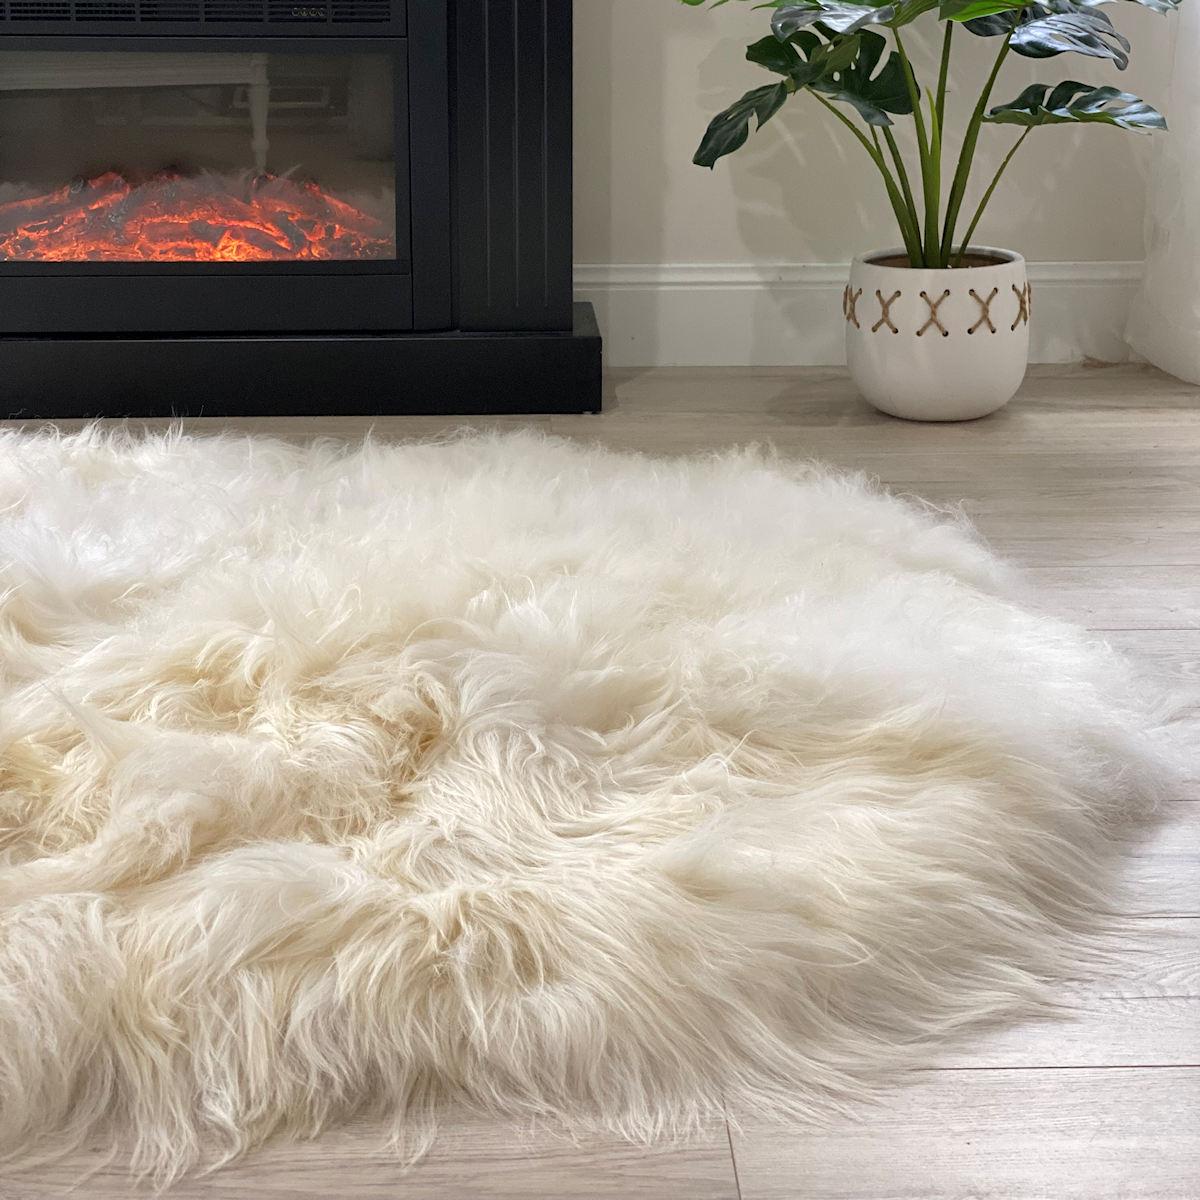 Icelandic Sheepskin Rug Natural White In New Condition For Sale In Dural, AU